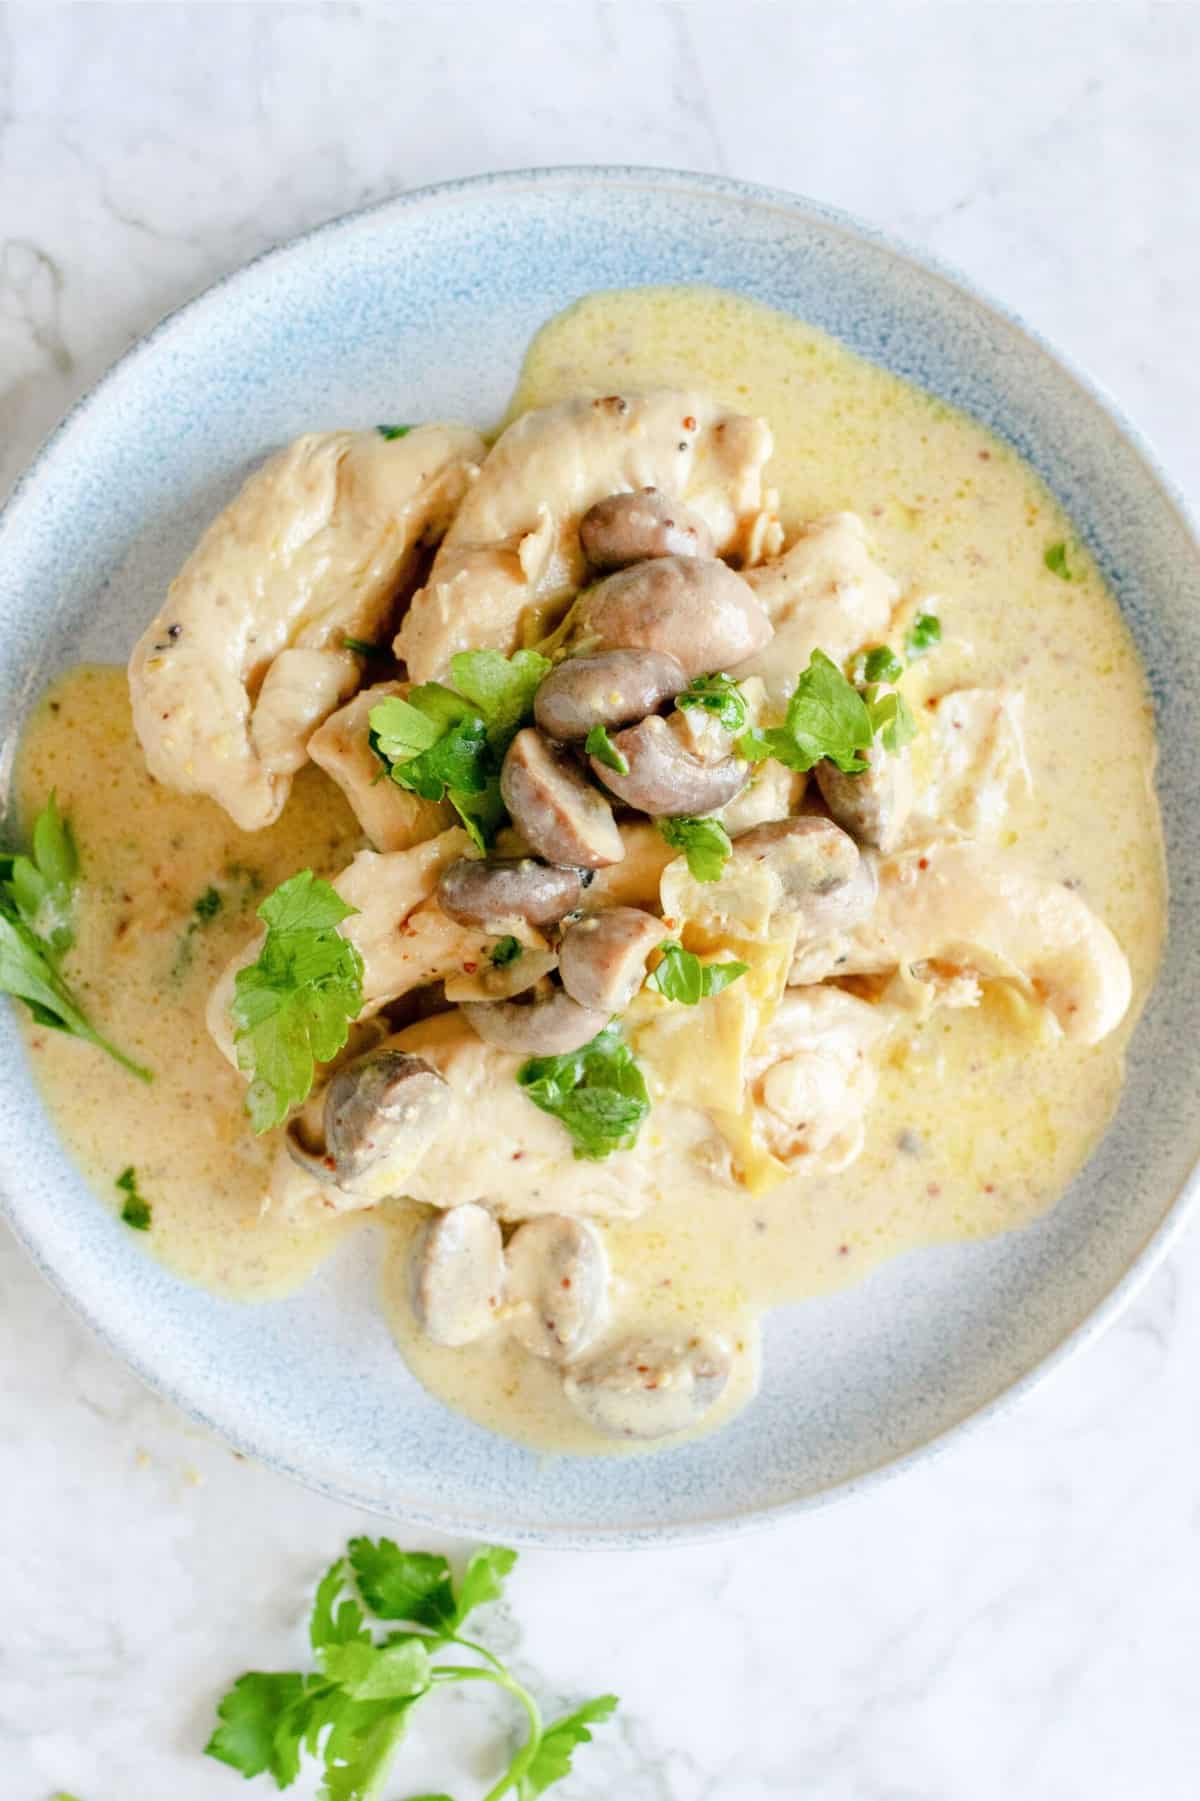 light blue plate with a portion of chicken dijon - chicken, mushrooms, artichokes, parsley and creamy mustard sauce